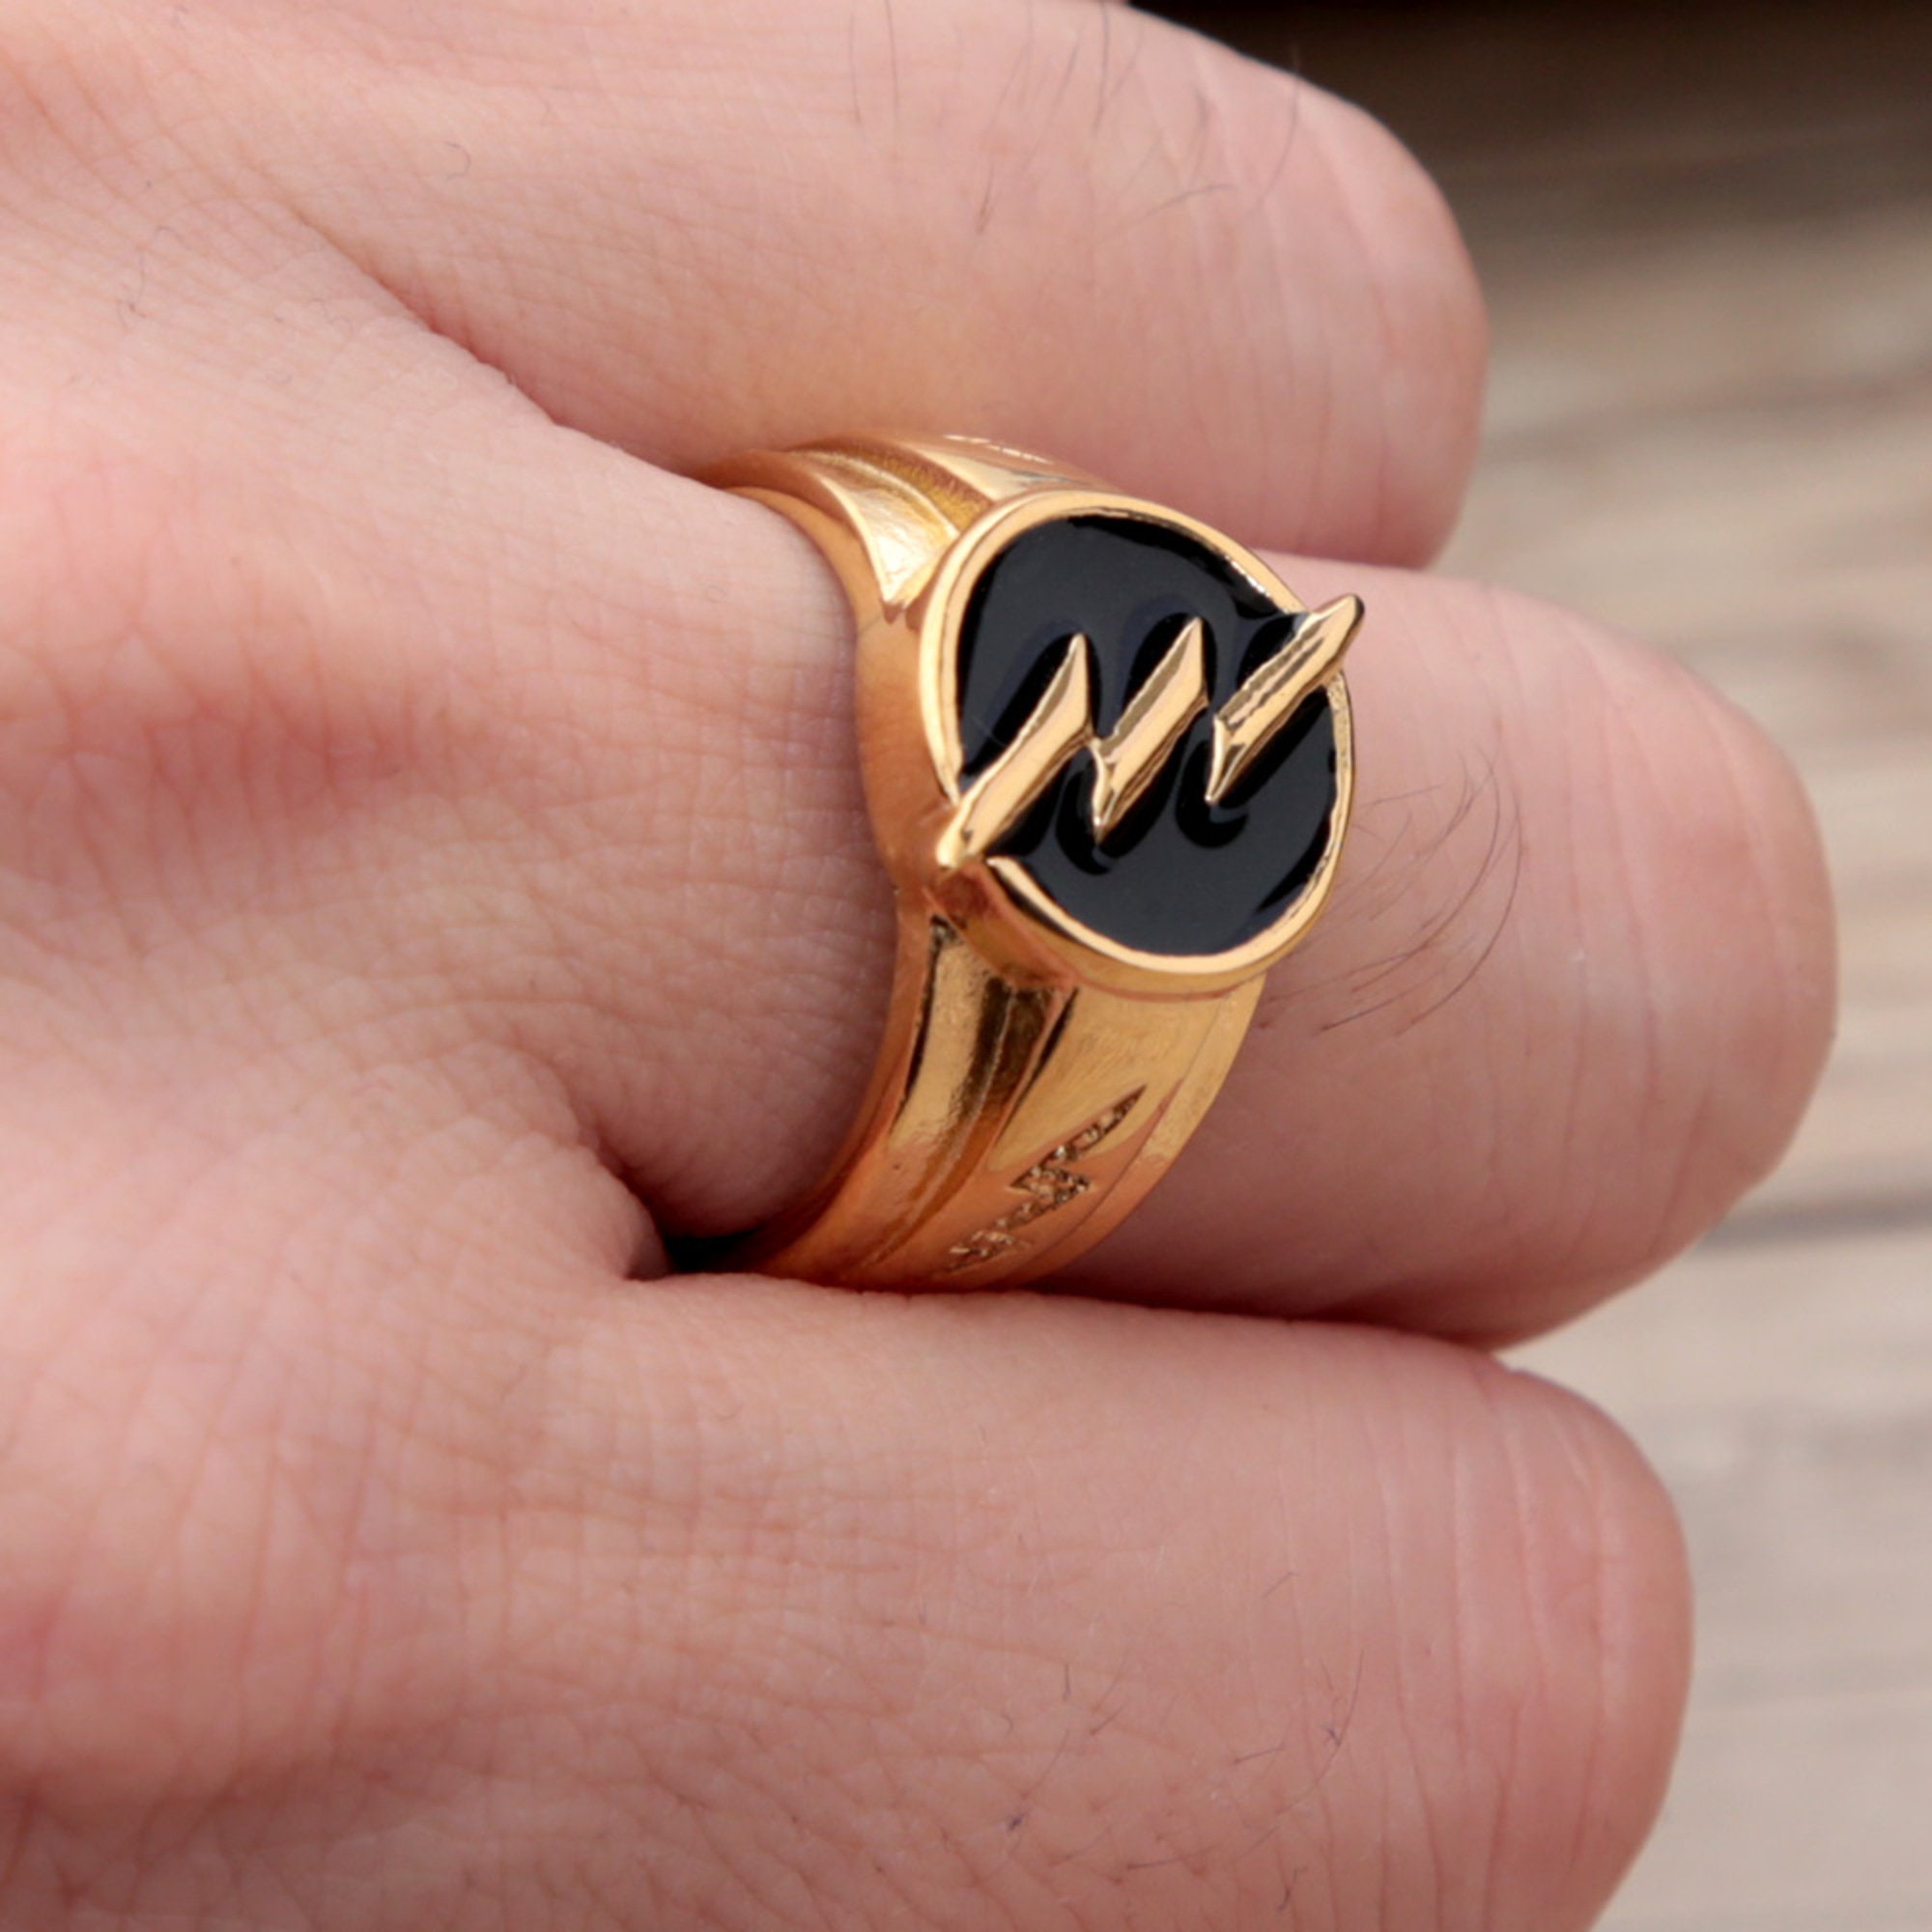 MAR239113 - THE FLASH SIGNET RING PROP REPLICA - Previews World